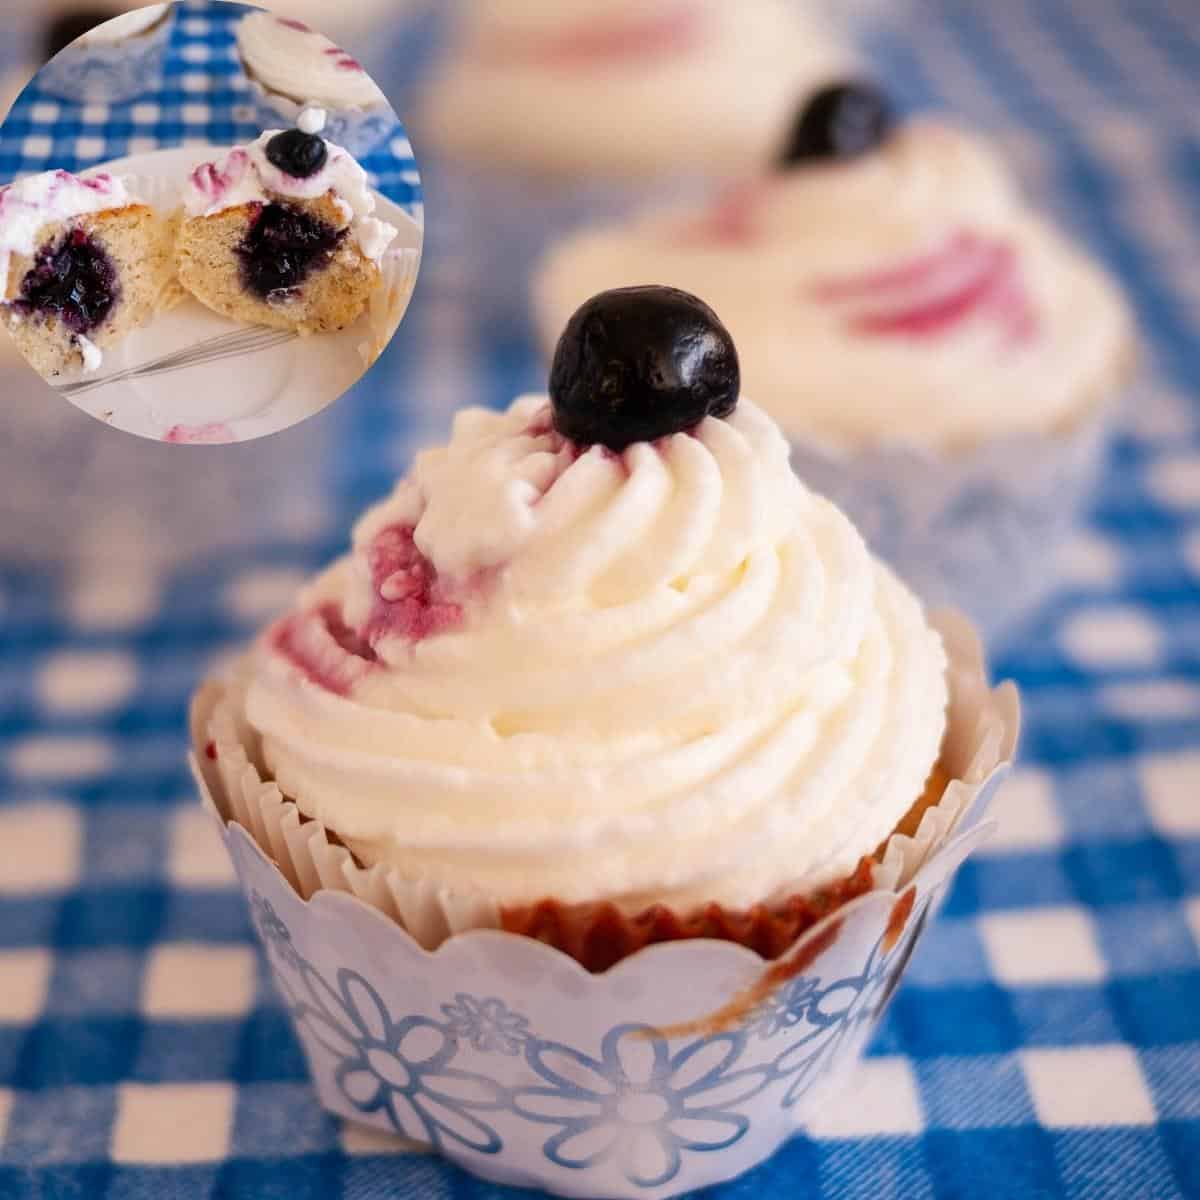 A frosted lemon cupcake with blueberry filling and cream cheese frosting.